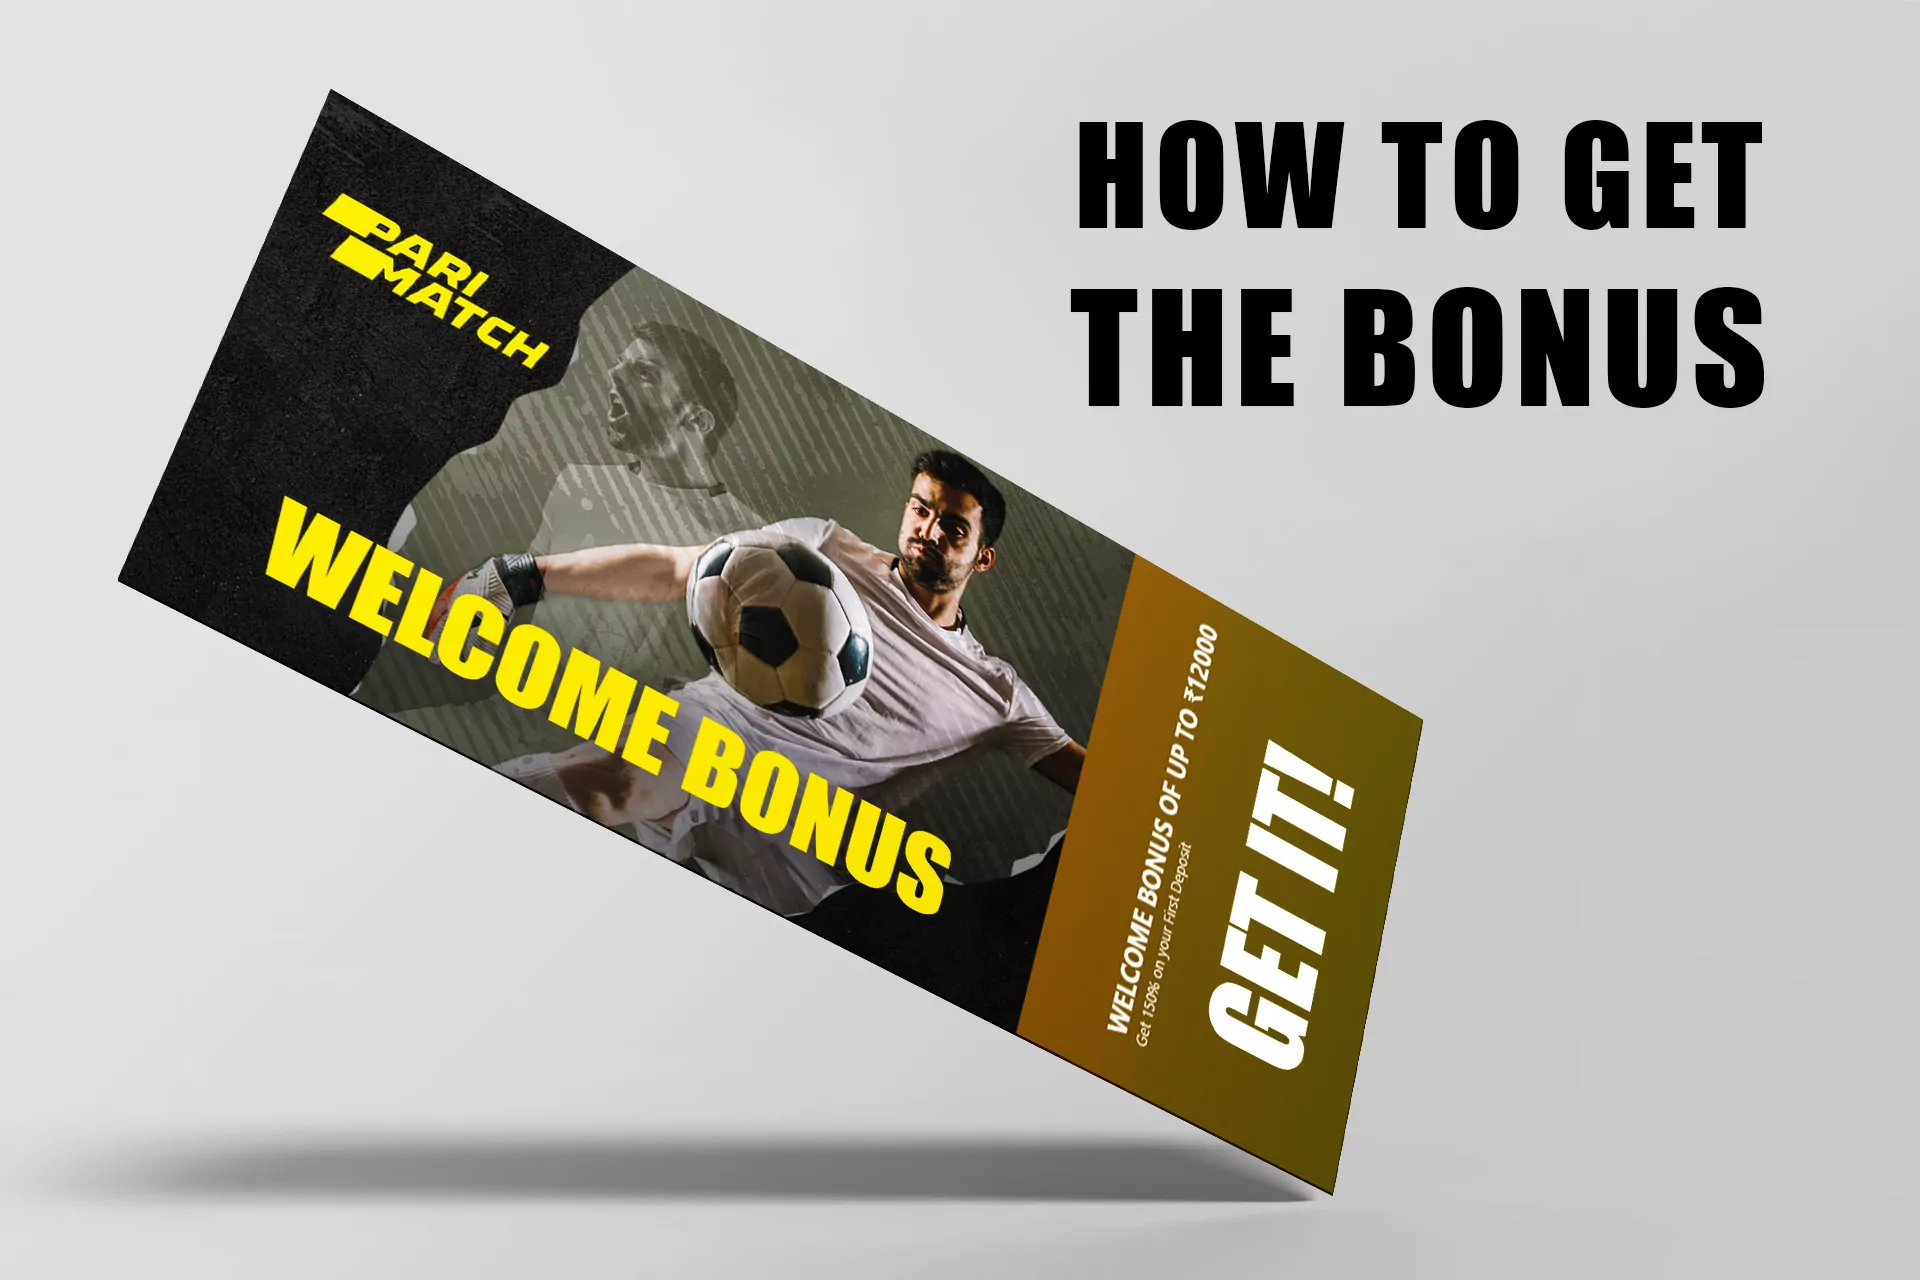 Don't forget to get the welcome bonus from the bookmaker.